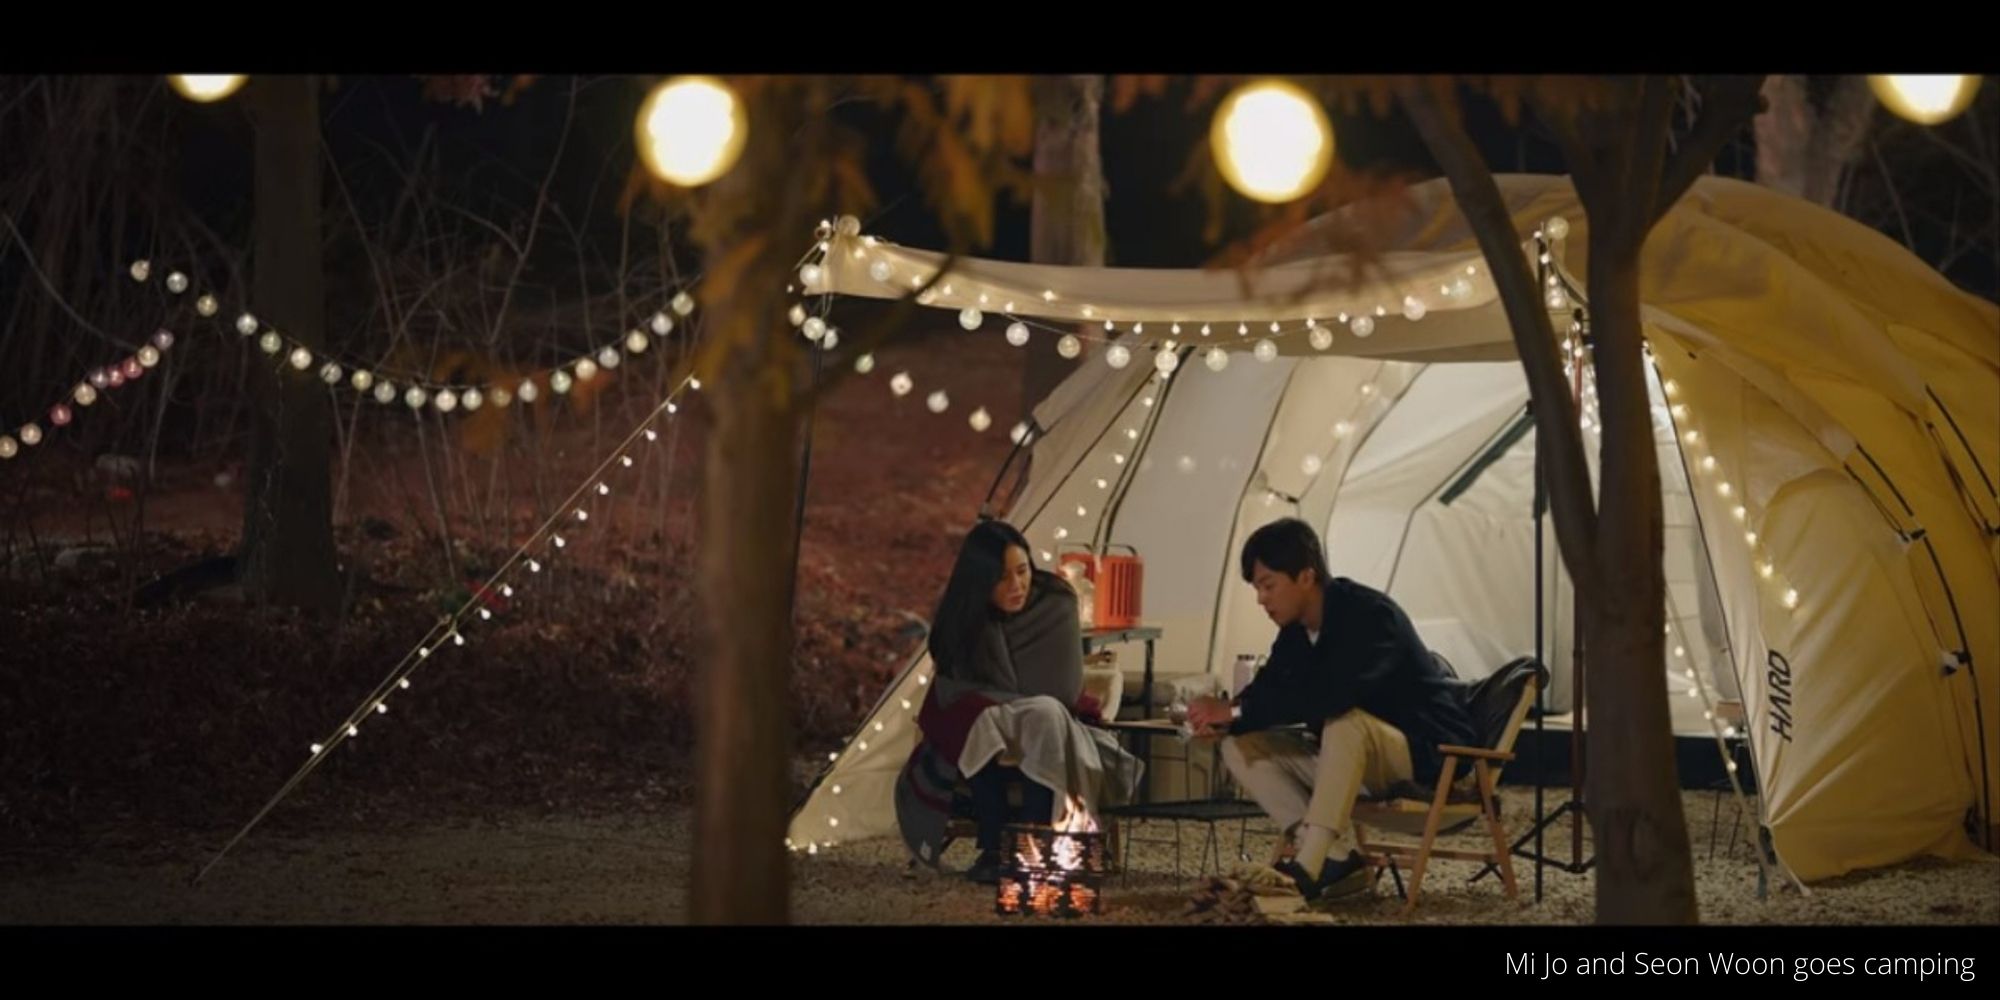 Mi Jo and Seon Woon goes camping